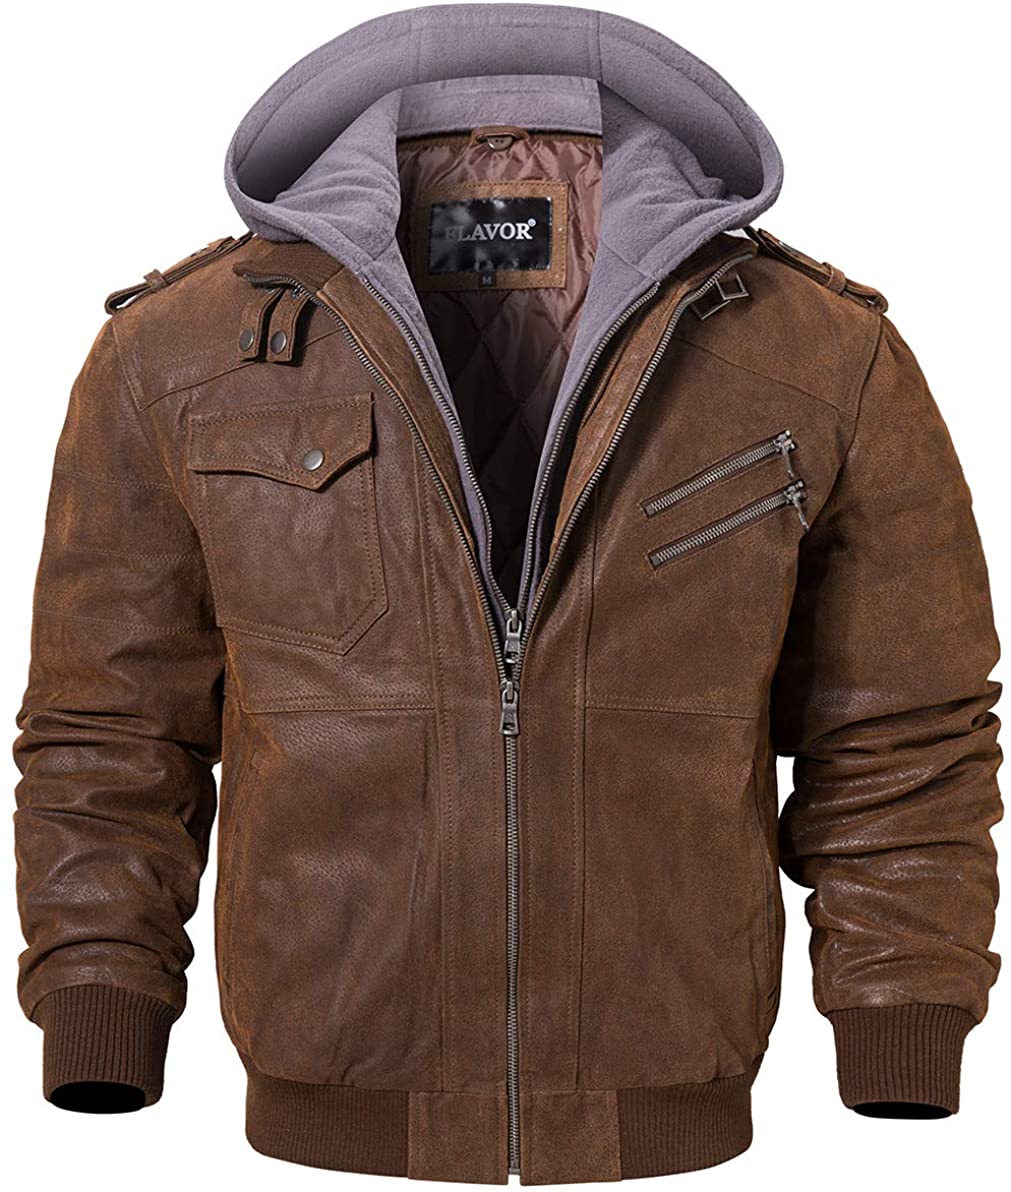 West Louis™ Removable Hooded Genuine Leather - Brown / 5XL  Leather jacket  hoodie, Leather jacket with hood, Brown leather motorcycle jacket